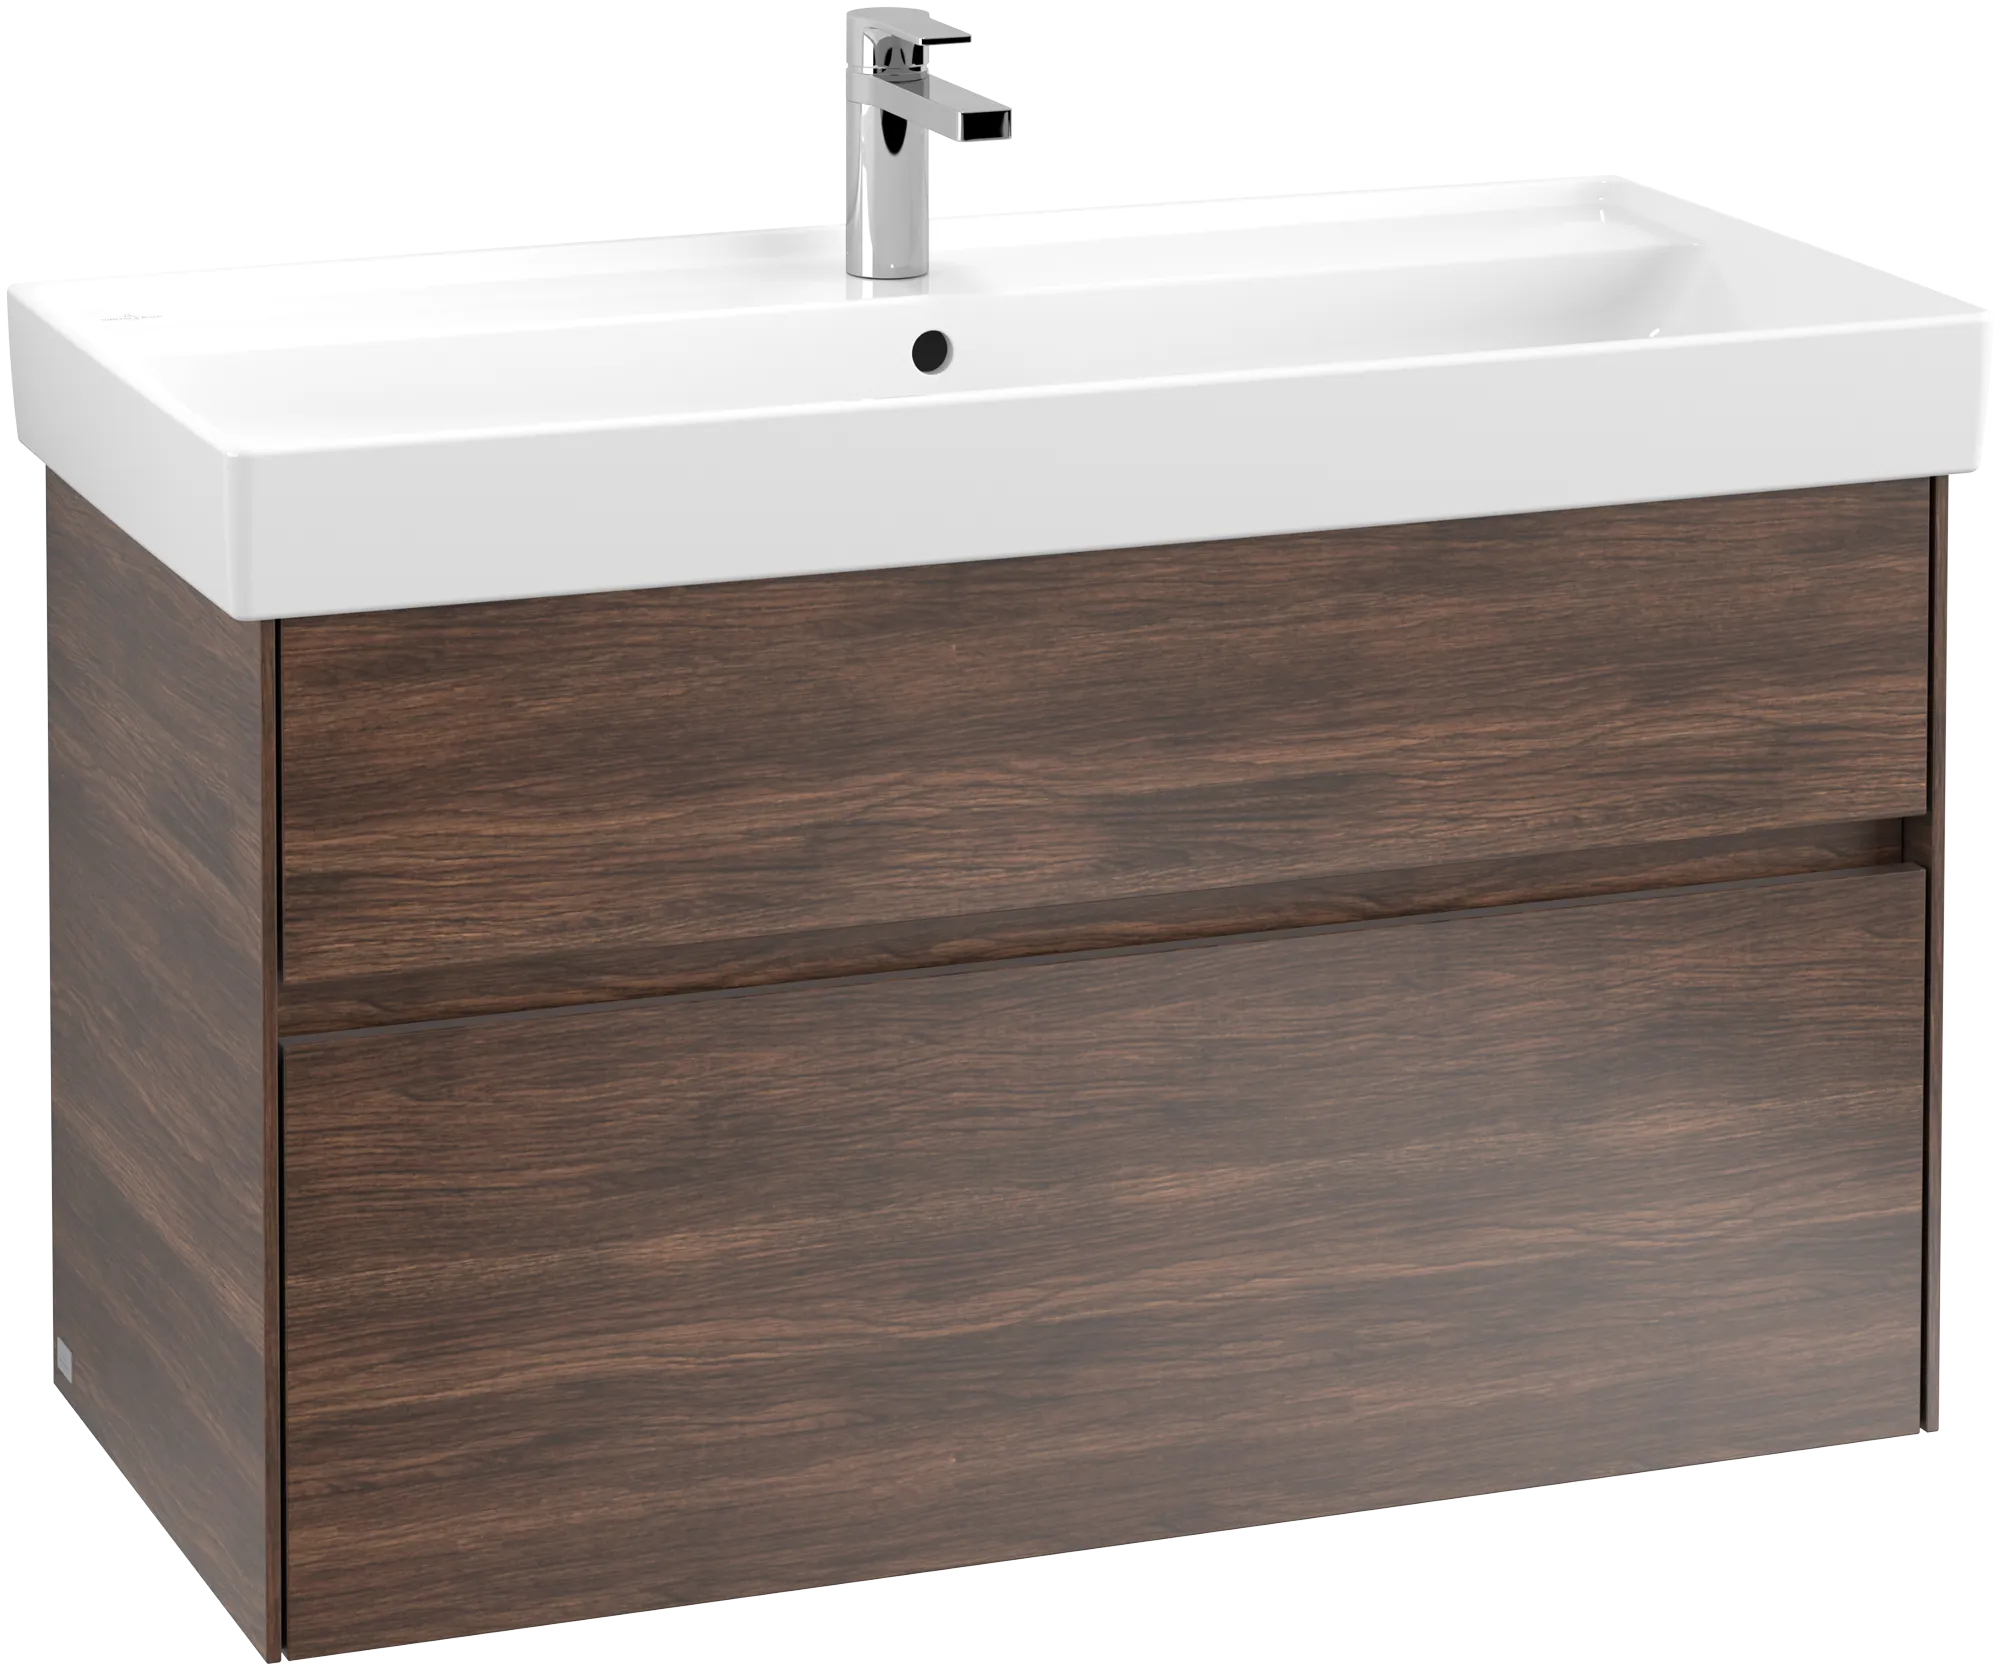 Picture of VILLEROY BOCH Collaro Vanity unit, with lighting, 2 pull-out compartments, 954 x 546 x 444 mm, Arizona Oak #C011B0VH